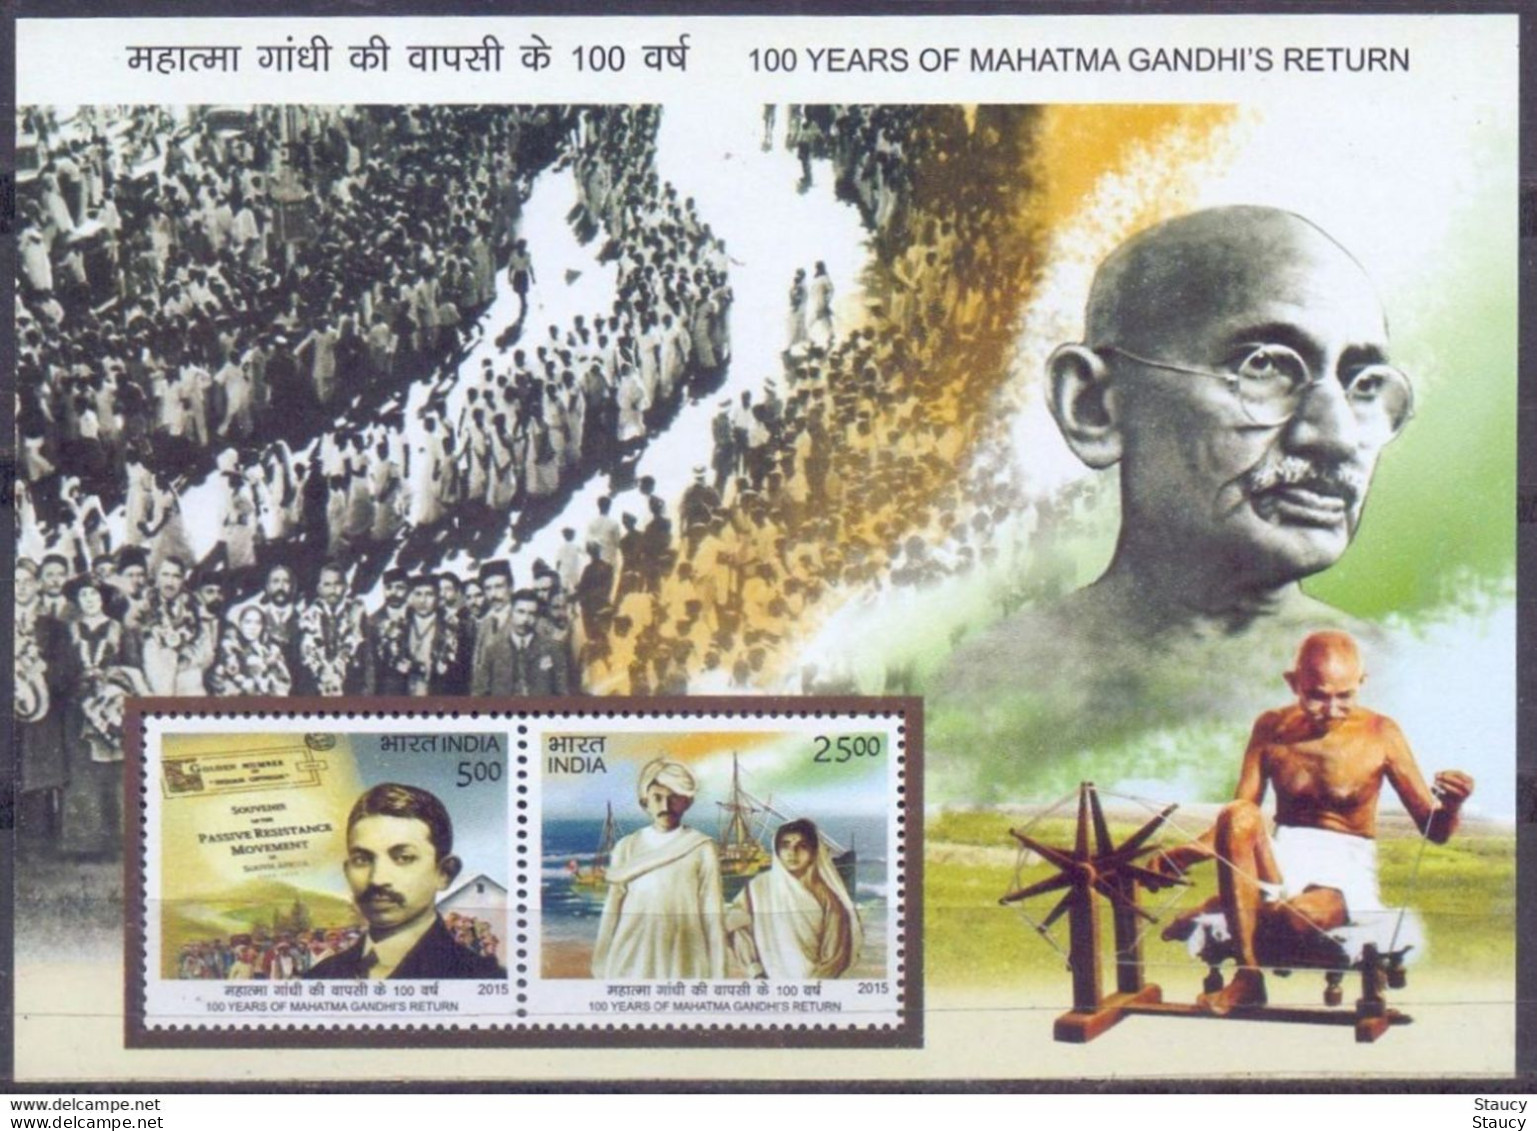 India Worldwide Mahatma Gandhi Stamp Sheets Collection lot MNH as per scan see 58 scans